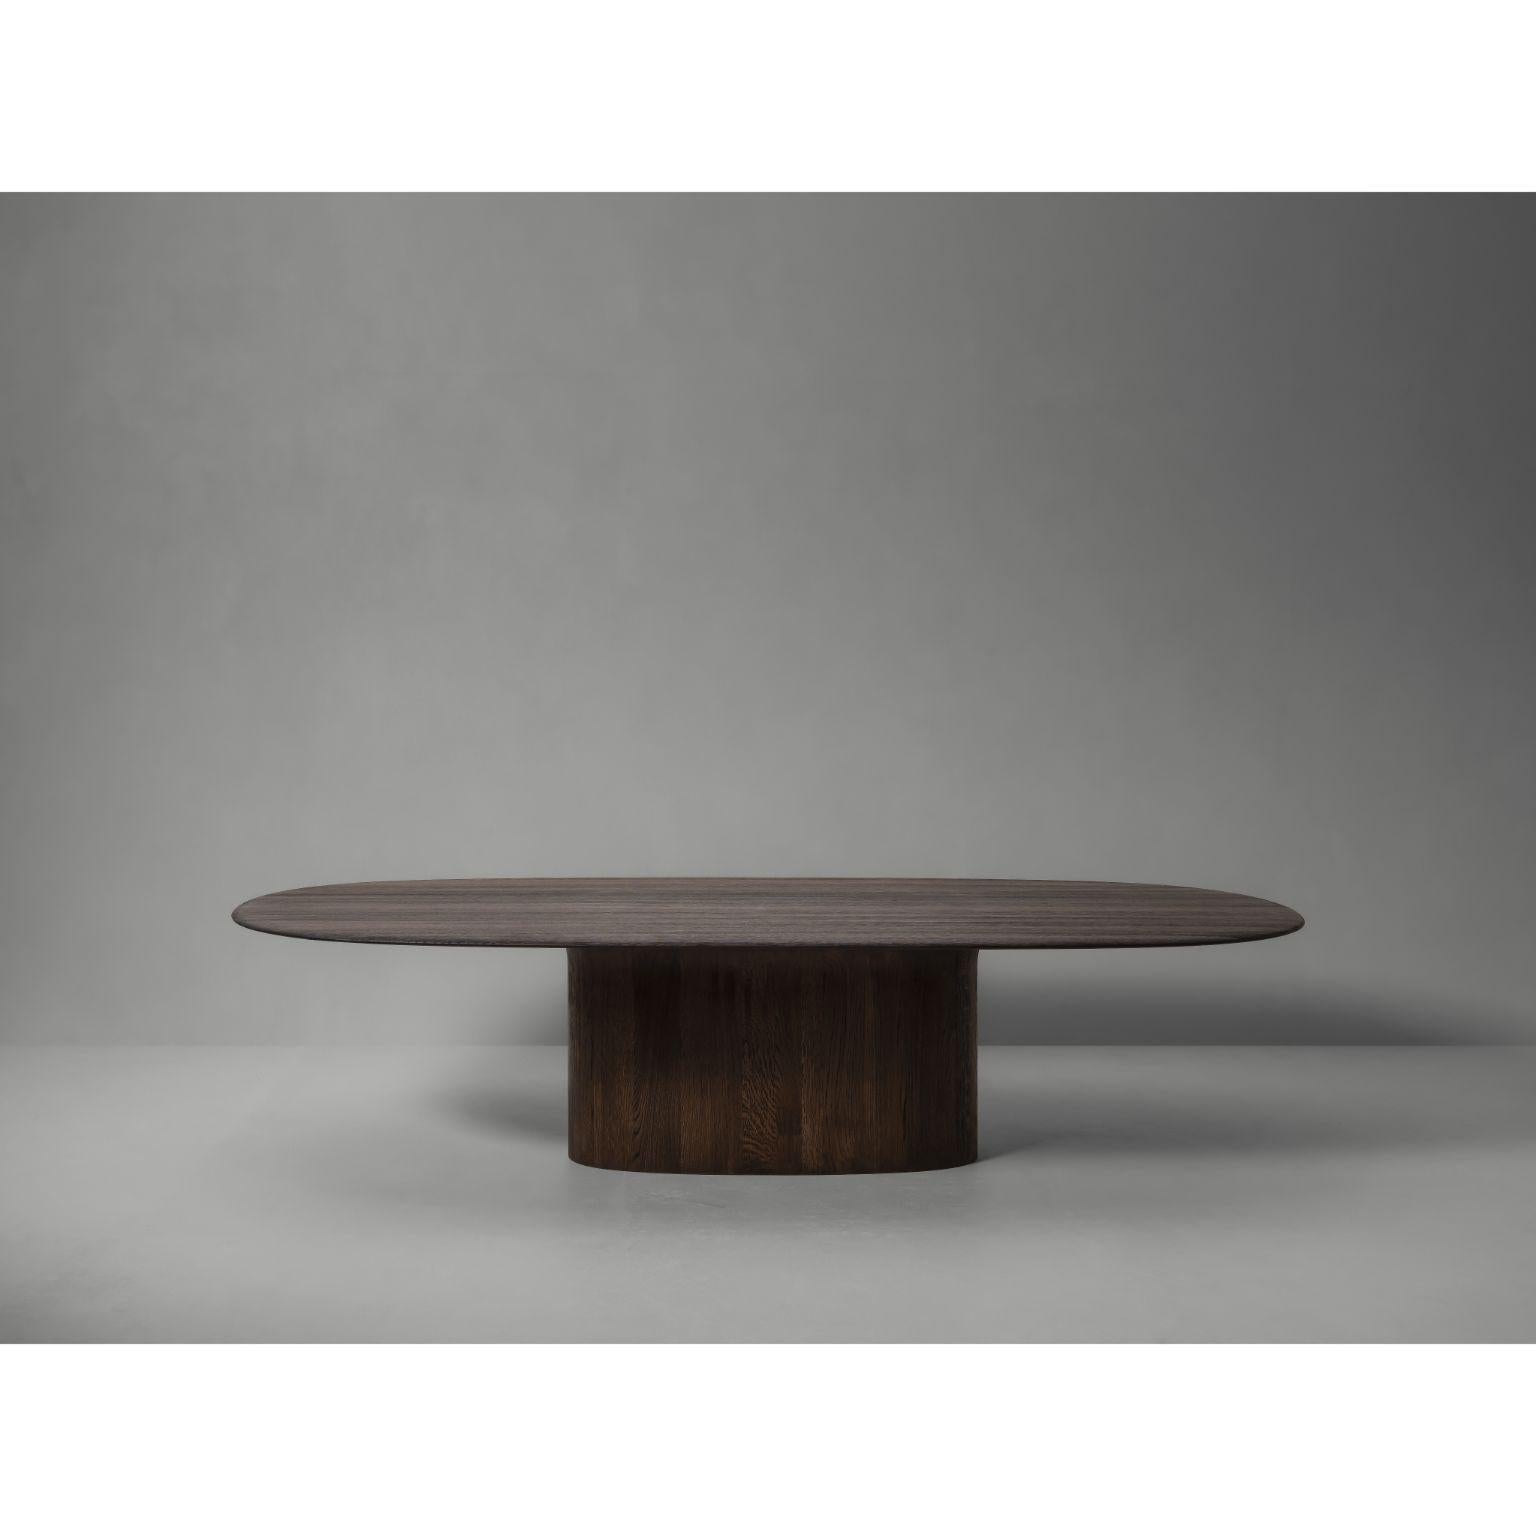 Anvil Semi-Oval Dinning Table by Van Rossum
Dimensions: D 240 x W 150 x H 72.5 cm
Materials: Walnut

A dining table with an elegantly contoured tabletop that narrows as it reaches the edge. Available in French oak or walnut, and with a round,